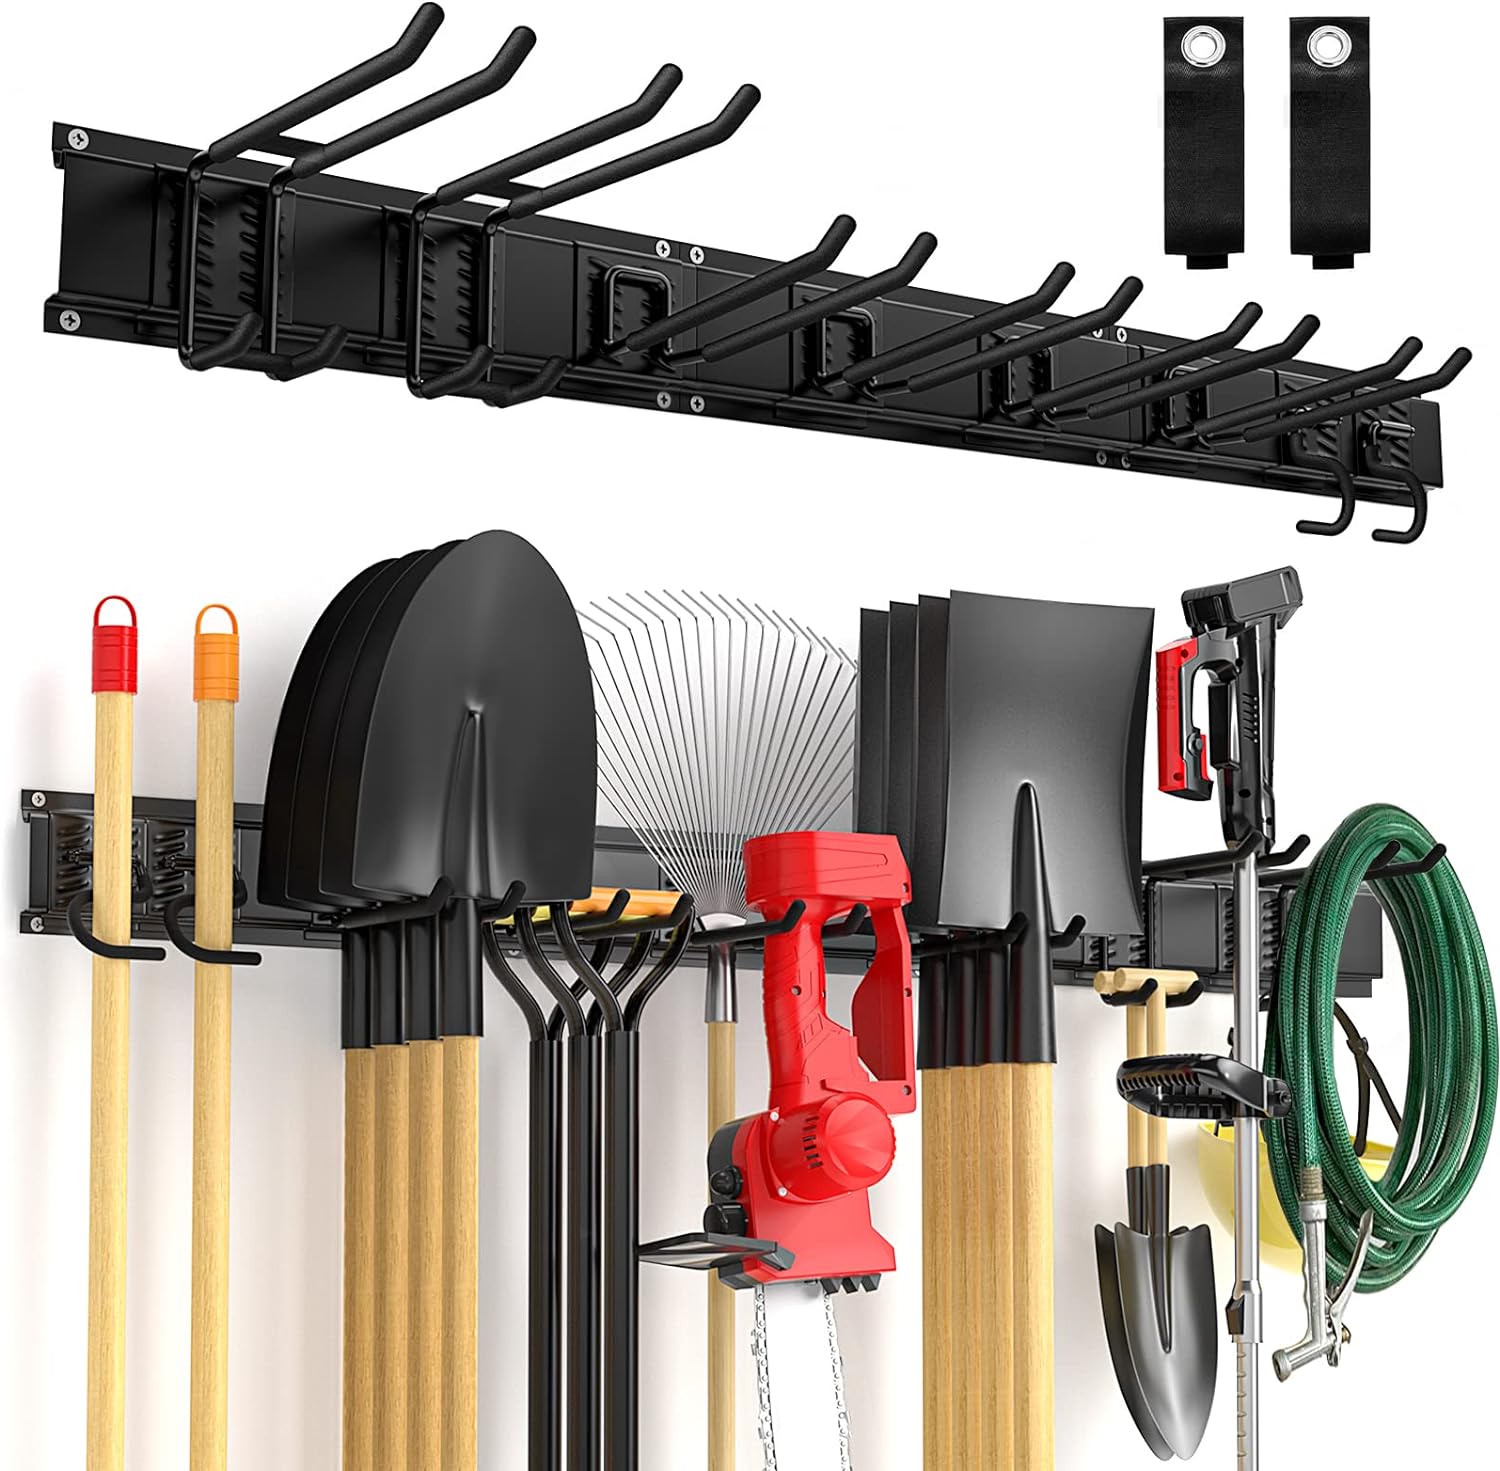 Garage Tool Organizer Wall Mount 11 PCS, Yard Garden Tool Organizer, Adjustable Garage Organizers with 8 Heavy Duty Hooks, Max Load 500lbs Garage Storage for Garden Tools, Shovels, Trimmers, Hoses